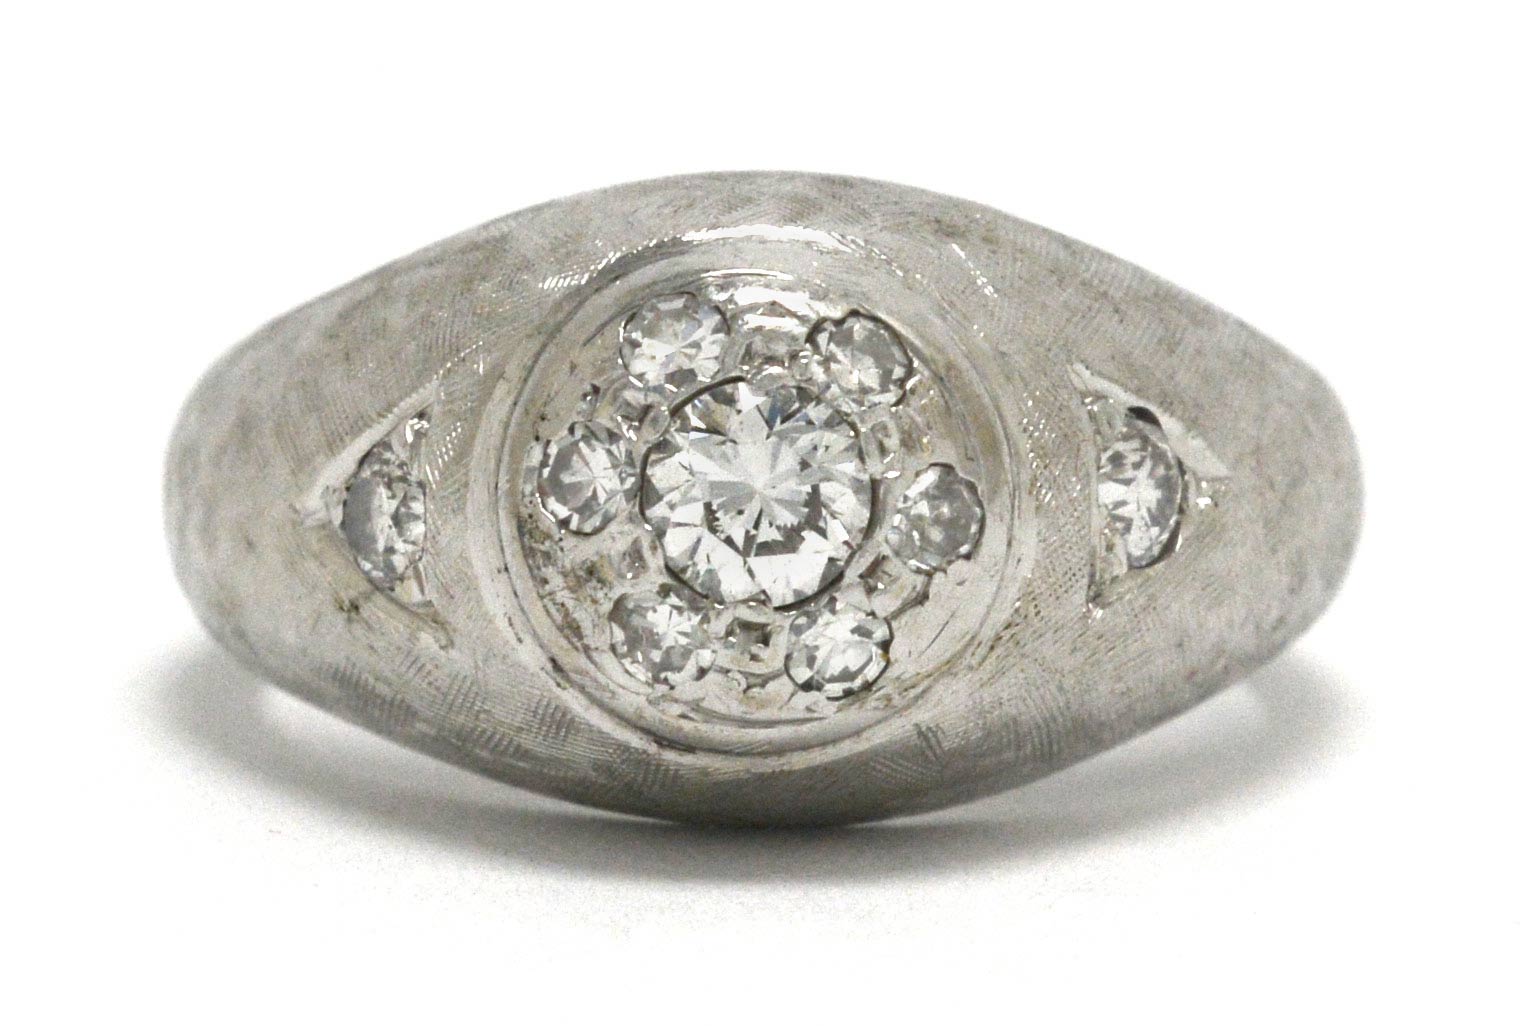 A transitional round brilliant diamond, white gold gypsy ring for men.